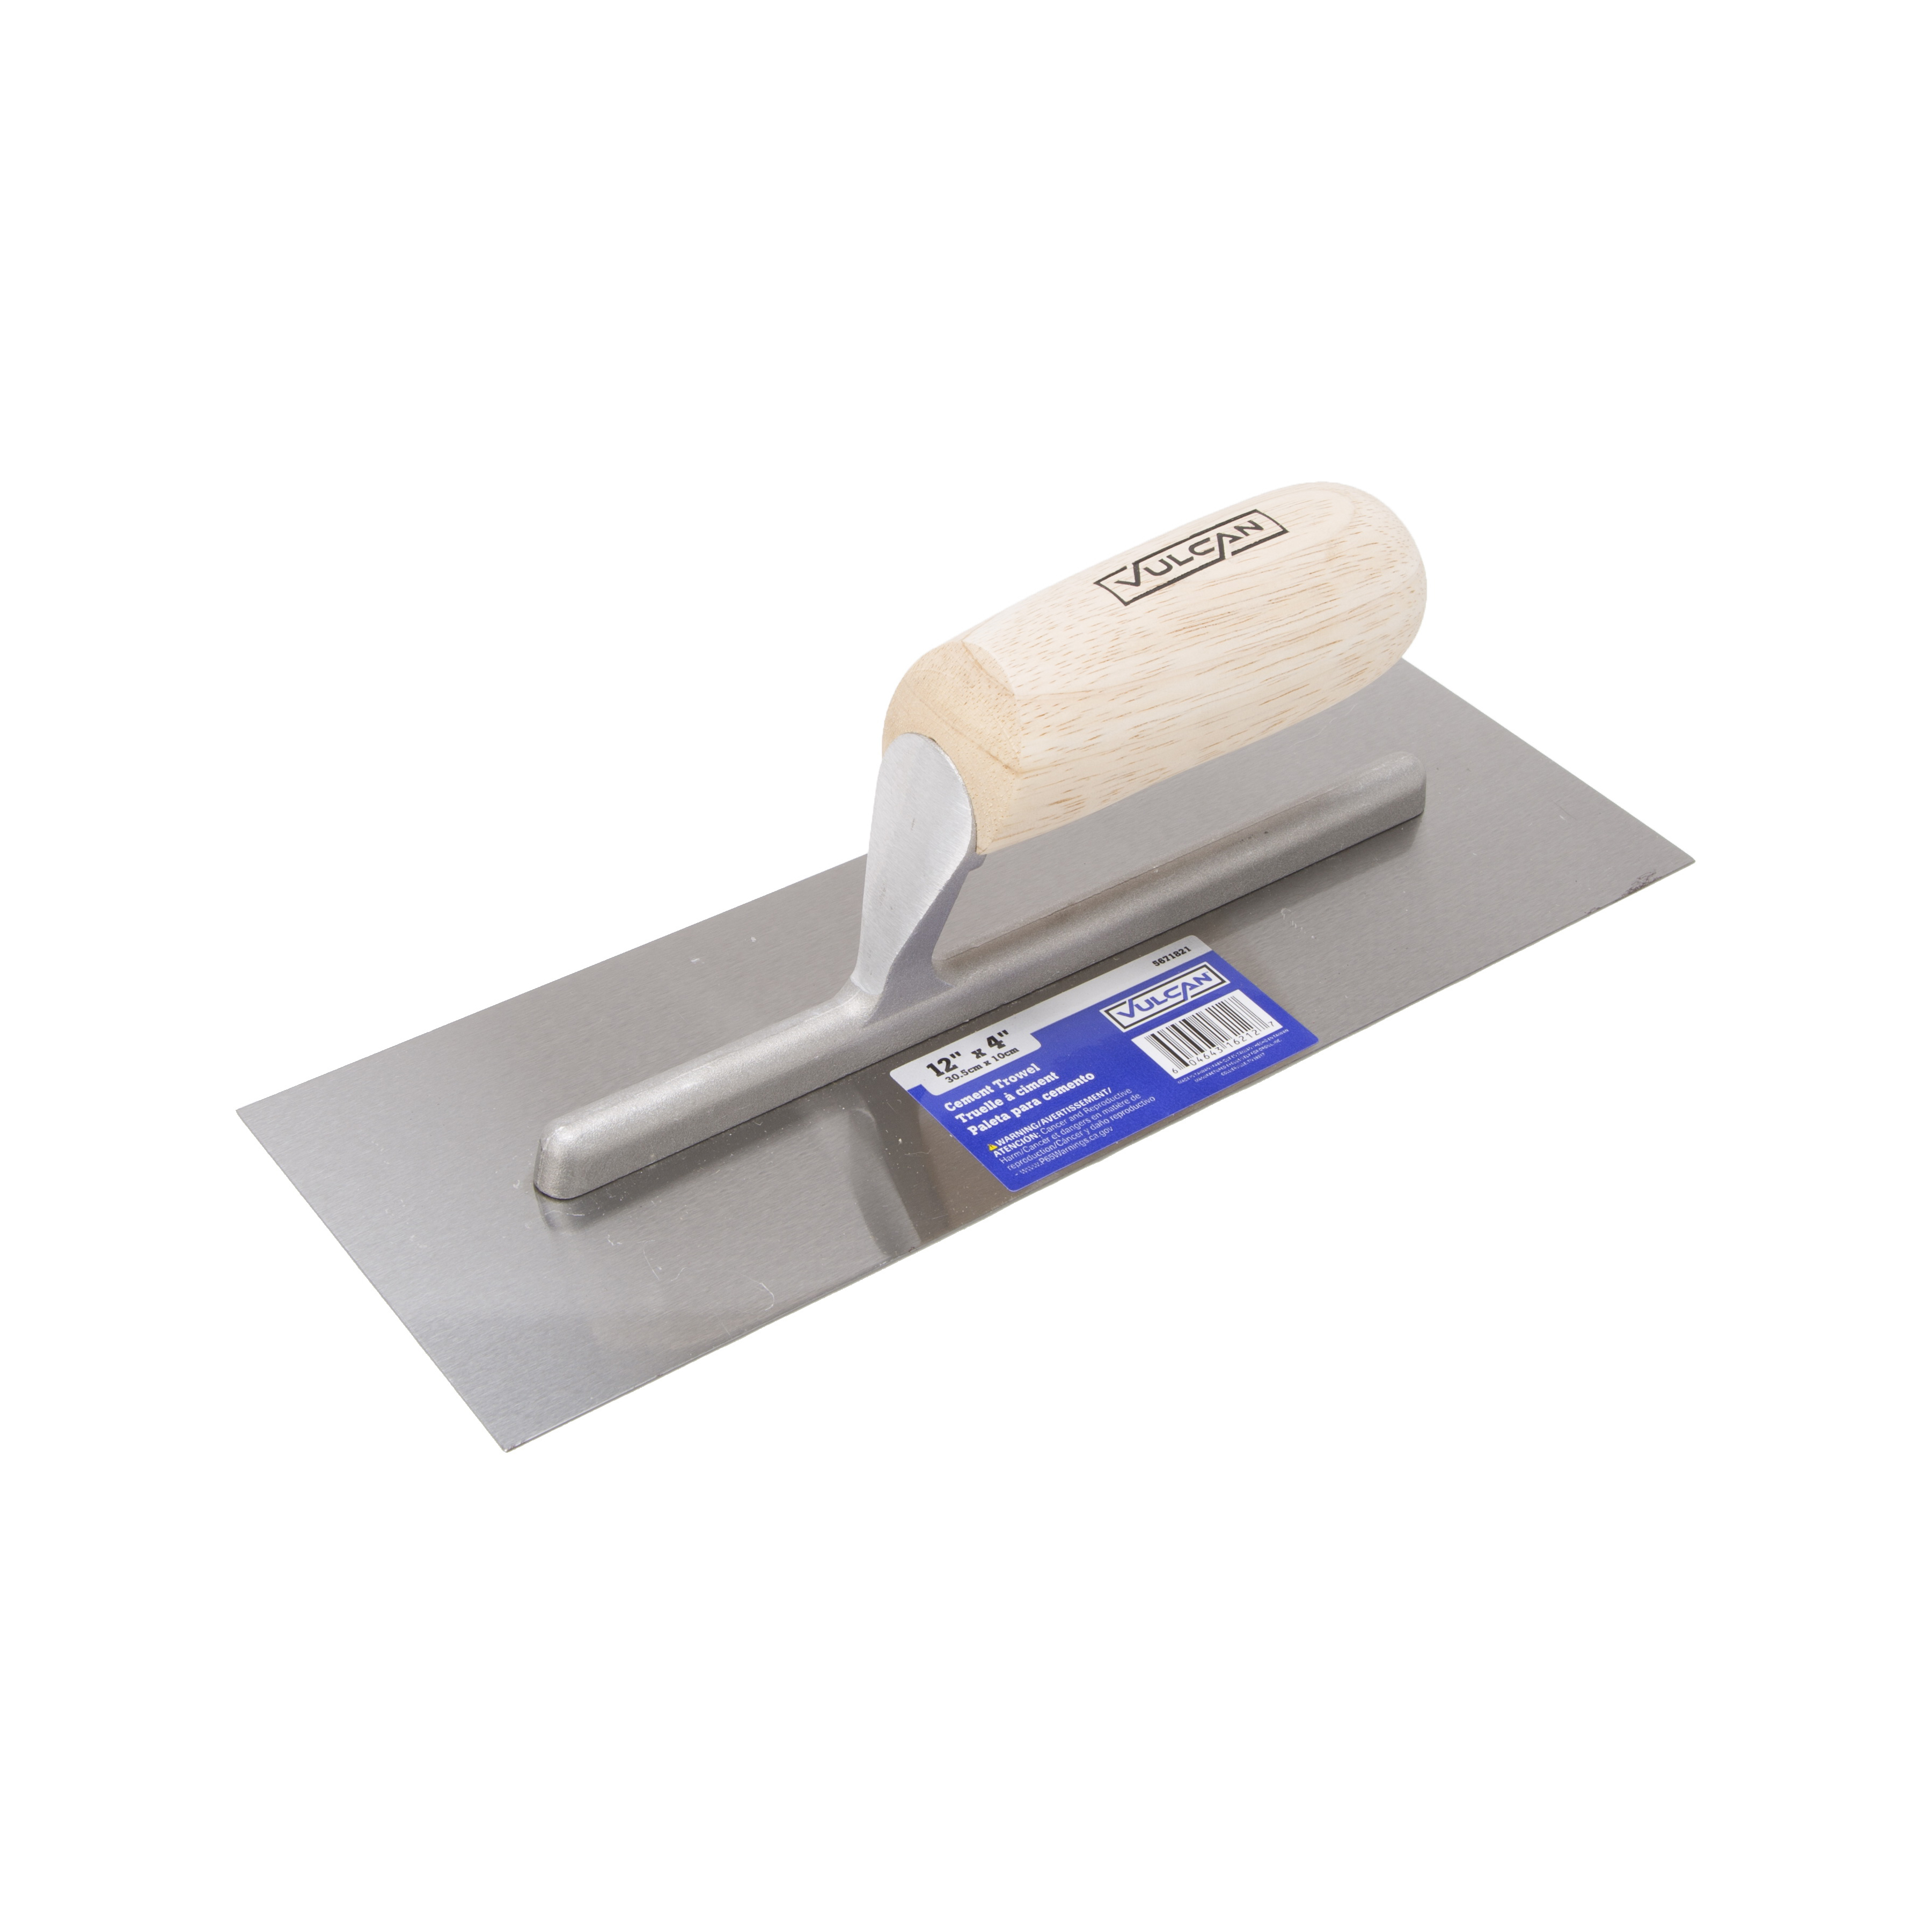 16212 Cement Trowel, 12 in L Blade, 4 in W Blade, Right Angle End, Ergonomic Handle, Wood Handle